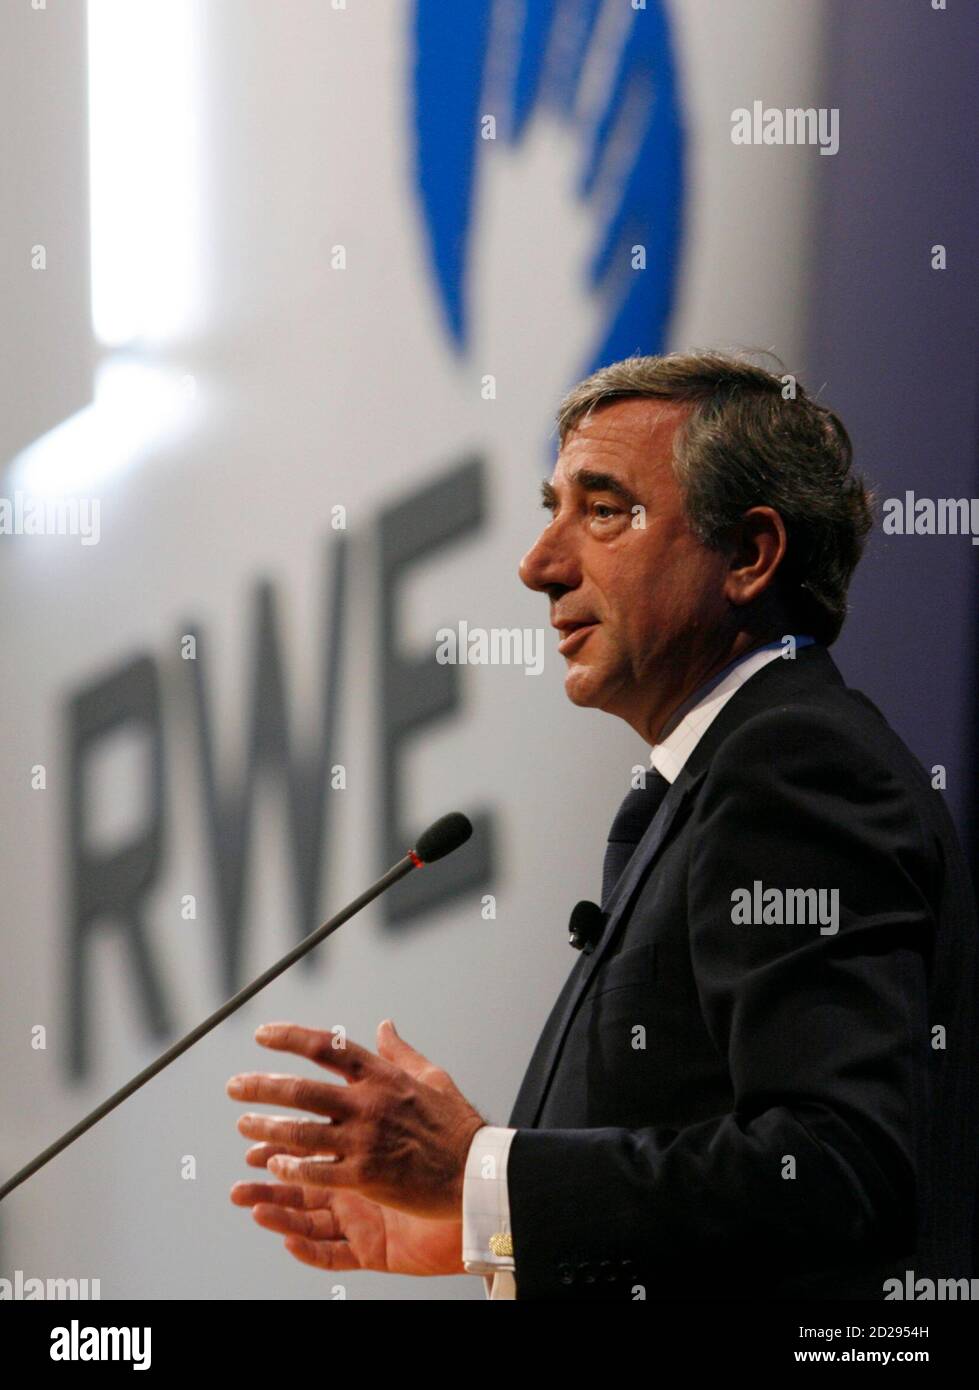 Harry Roels, CEO of German multi-utility RWE holds a speech during the general meeting in Essen April 18, 2007. REUTERS/Ina Fassbender     (GERMANY) Stock Photo